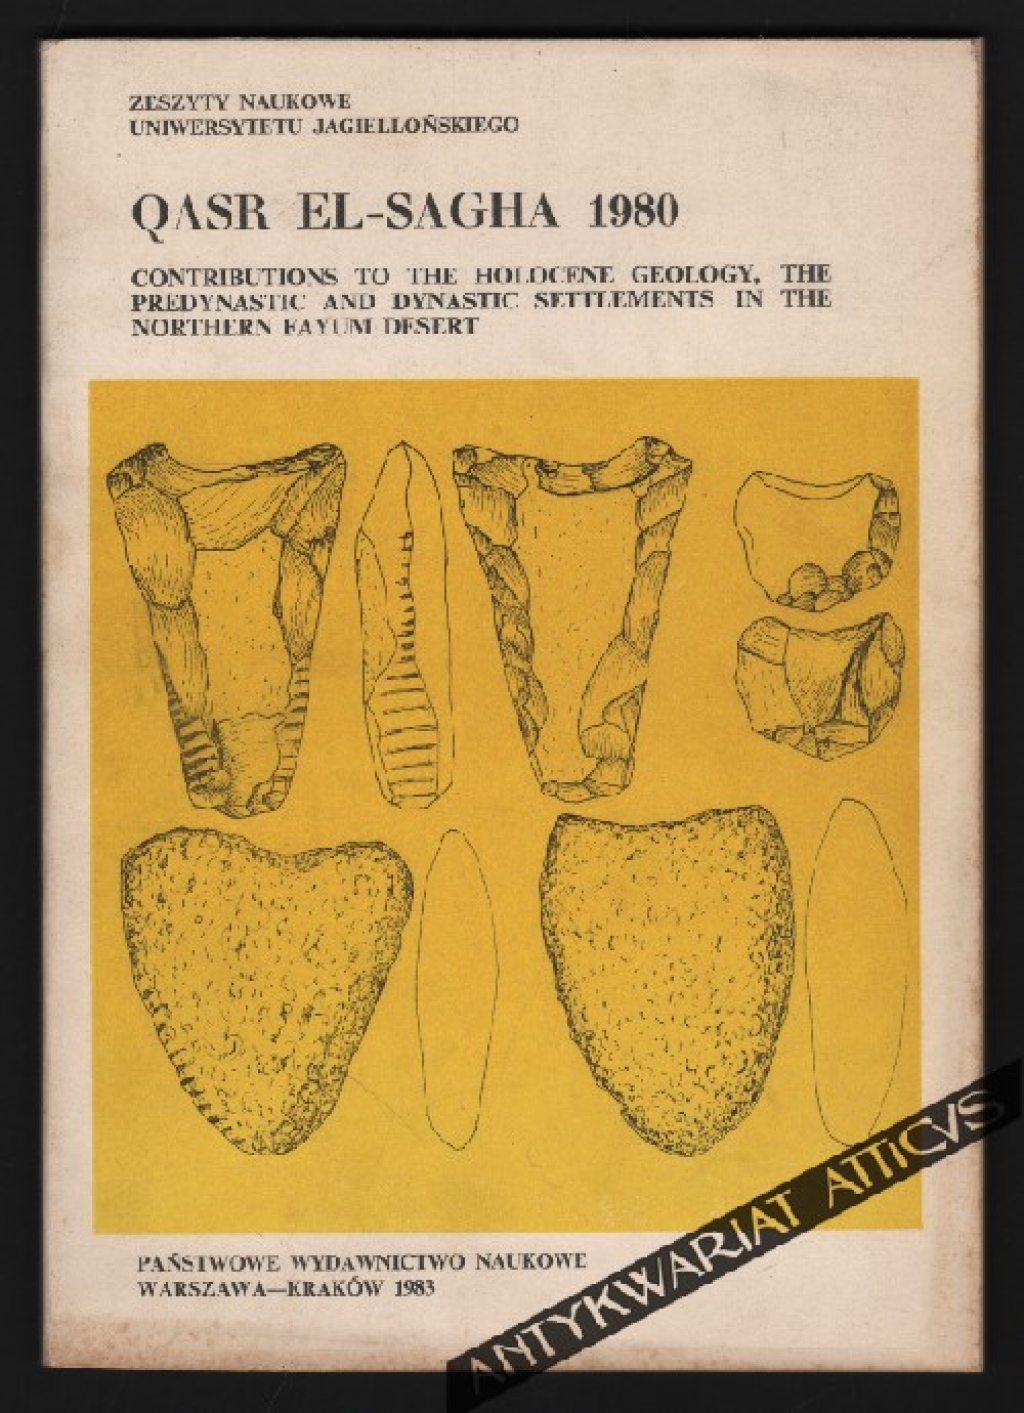 Qasr El-Sagha 1980. Contributions to the Holocene Geology, the Predynastic and Dynastic Settlements in the Northern Fayum Desert